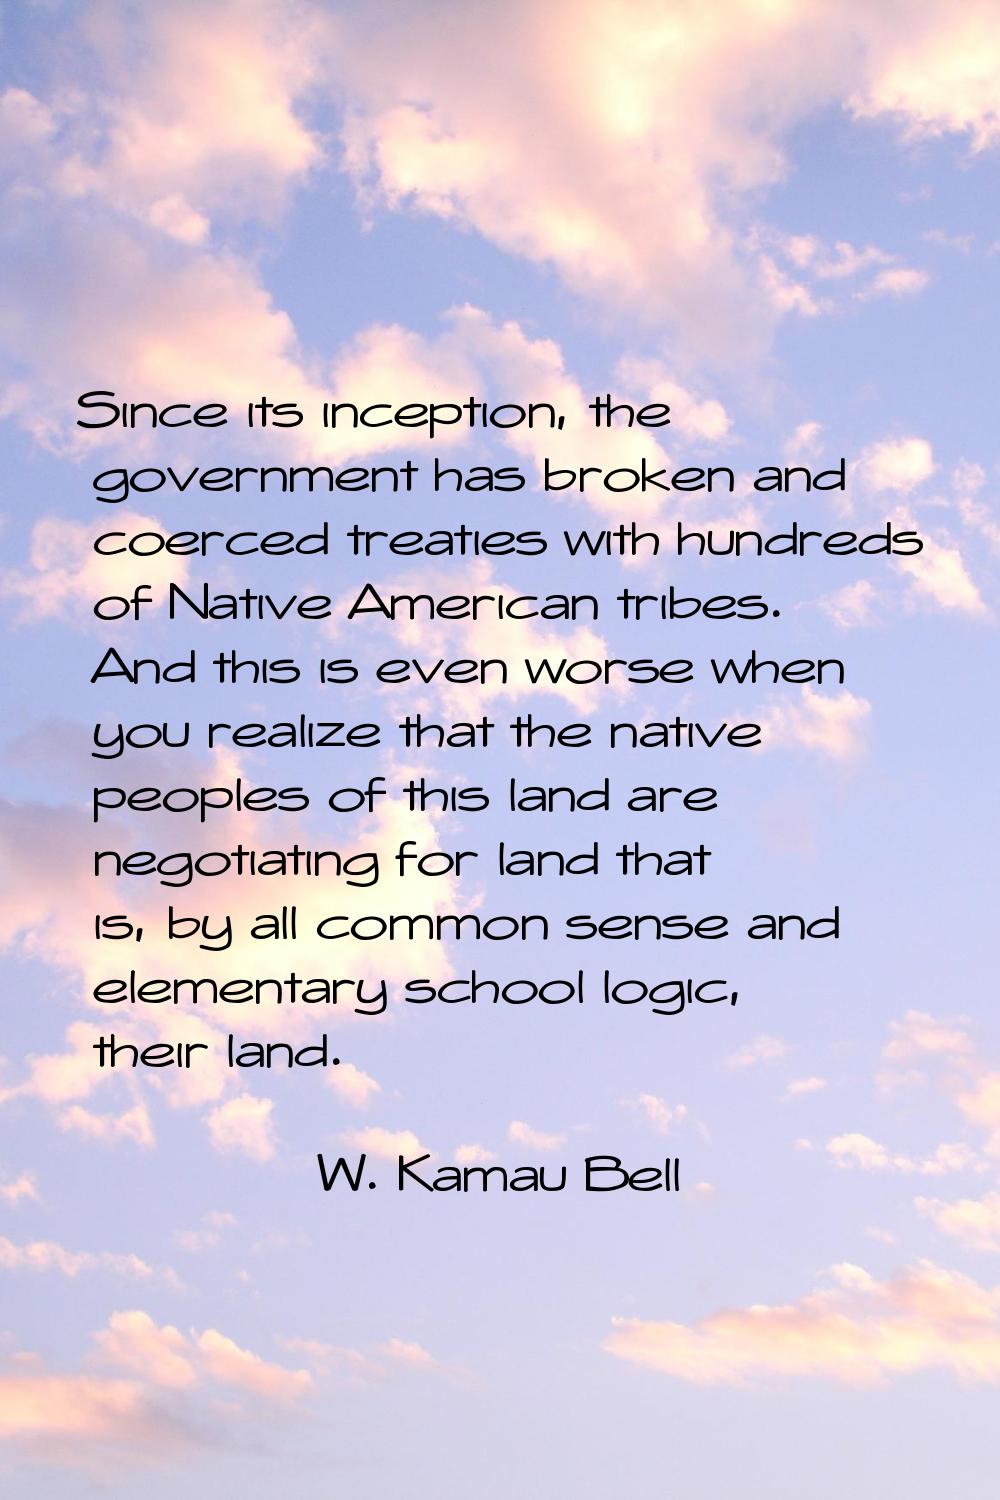 Since its inception, the government has broken and coerced treaties with hundreds of Native America